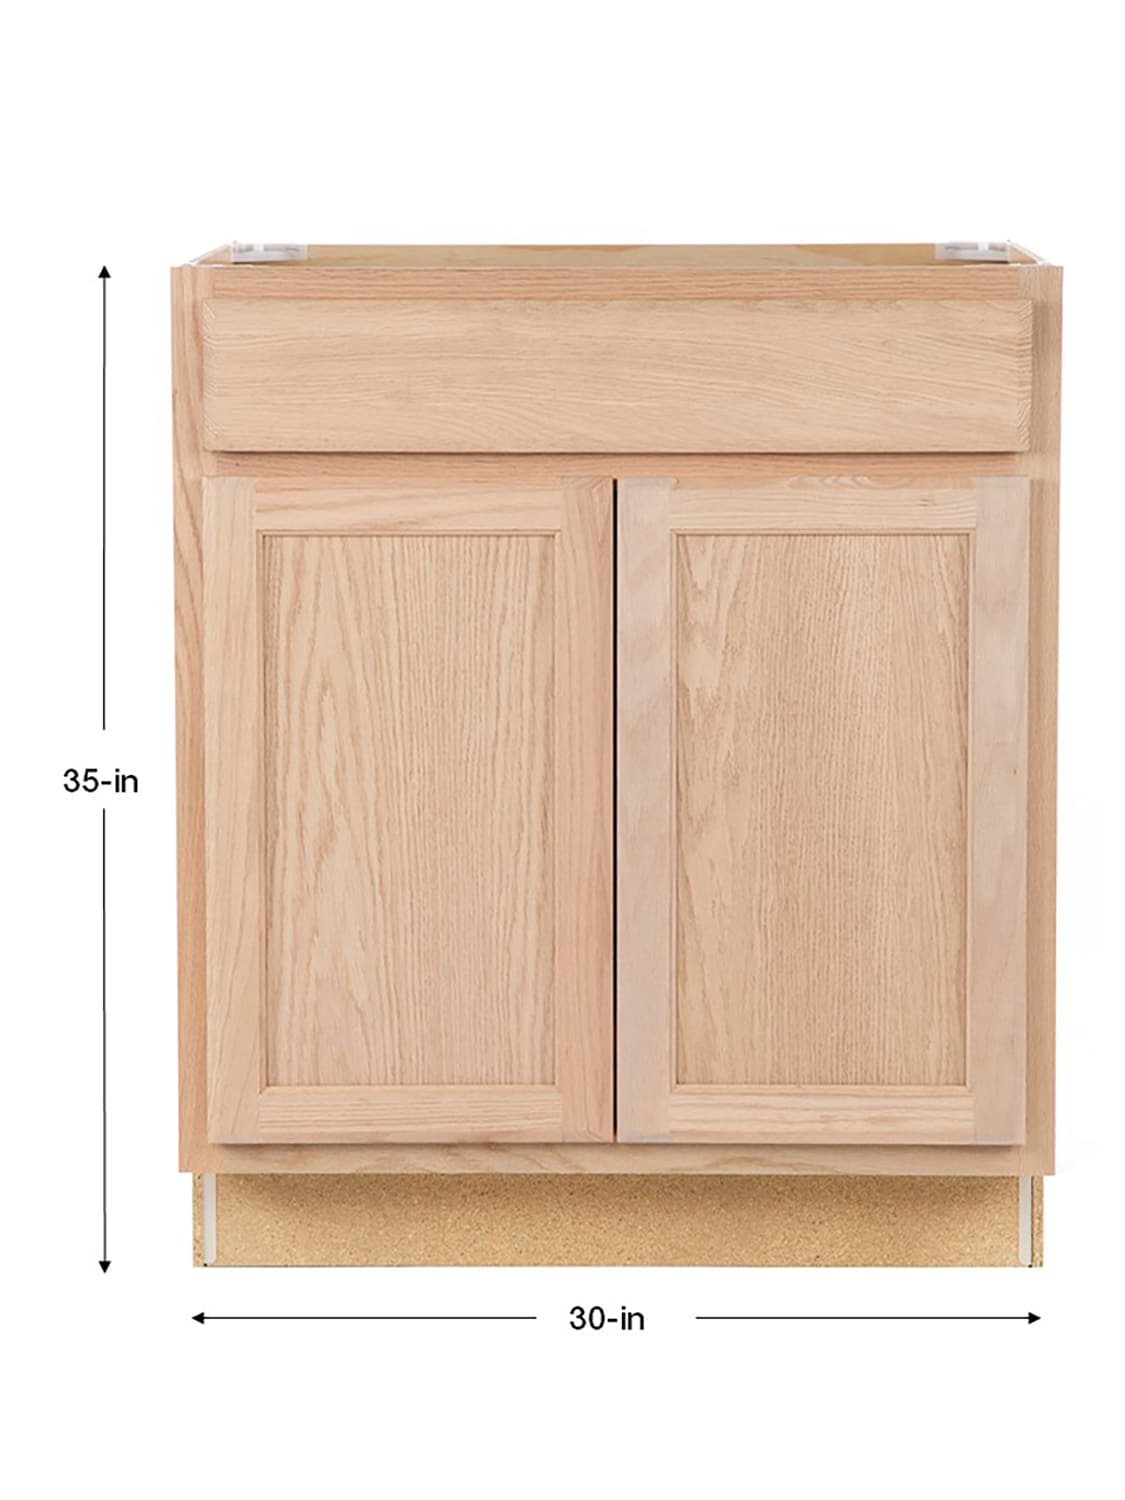 Project Source Unfinished 30 In Natural Rustic Oak Bathroom Vanity Cabinet The Vanities Without Tops Department At Com - 30 Inch Unfinished Bathroom Vanity Base Cabinet 36